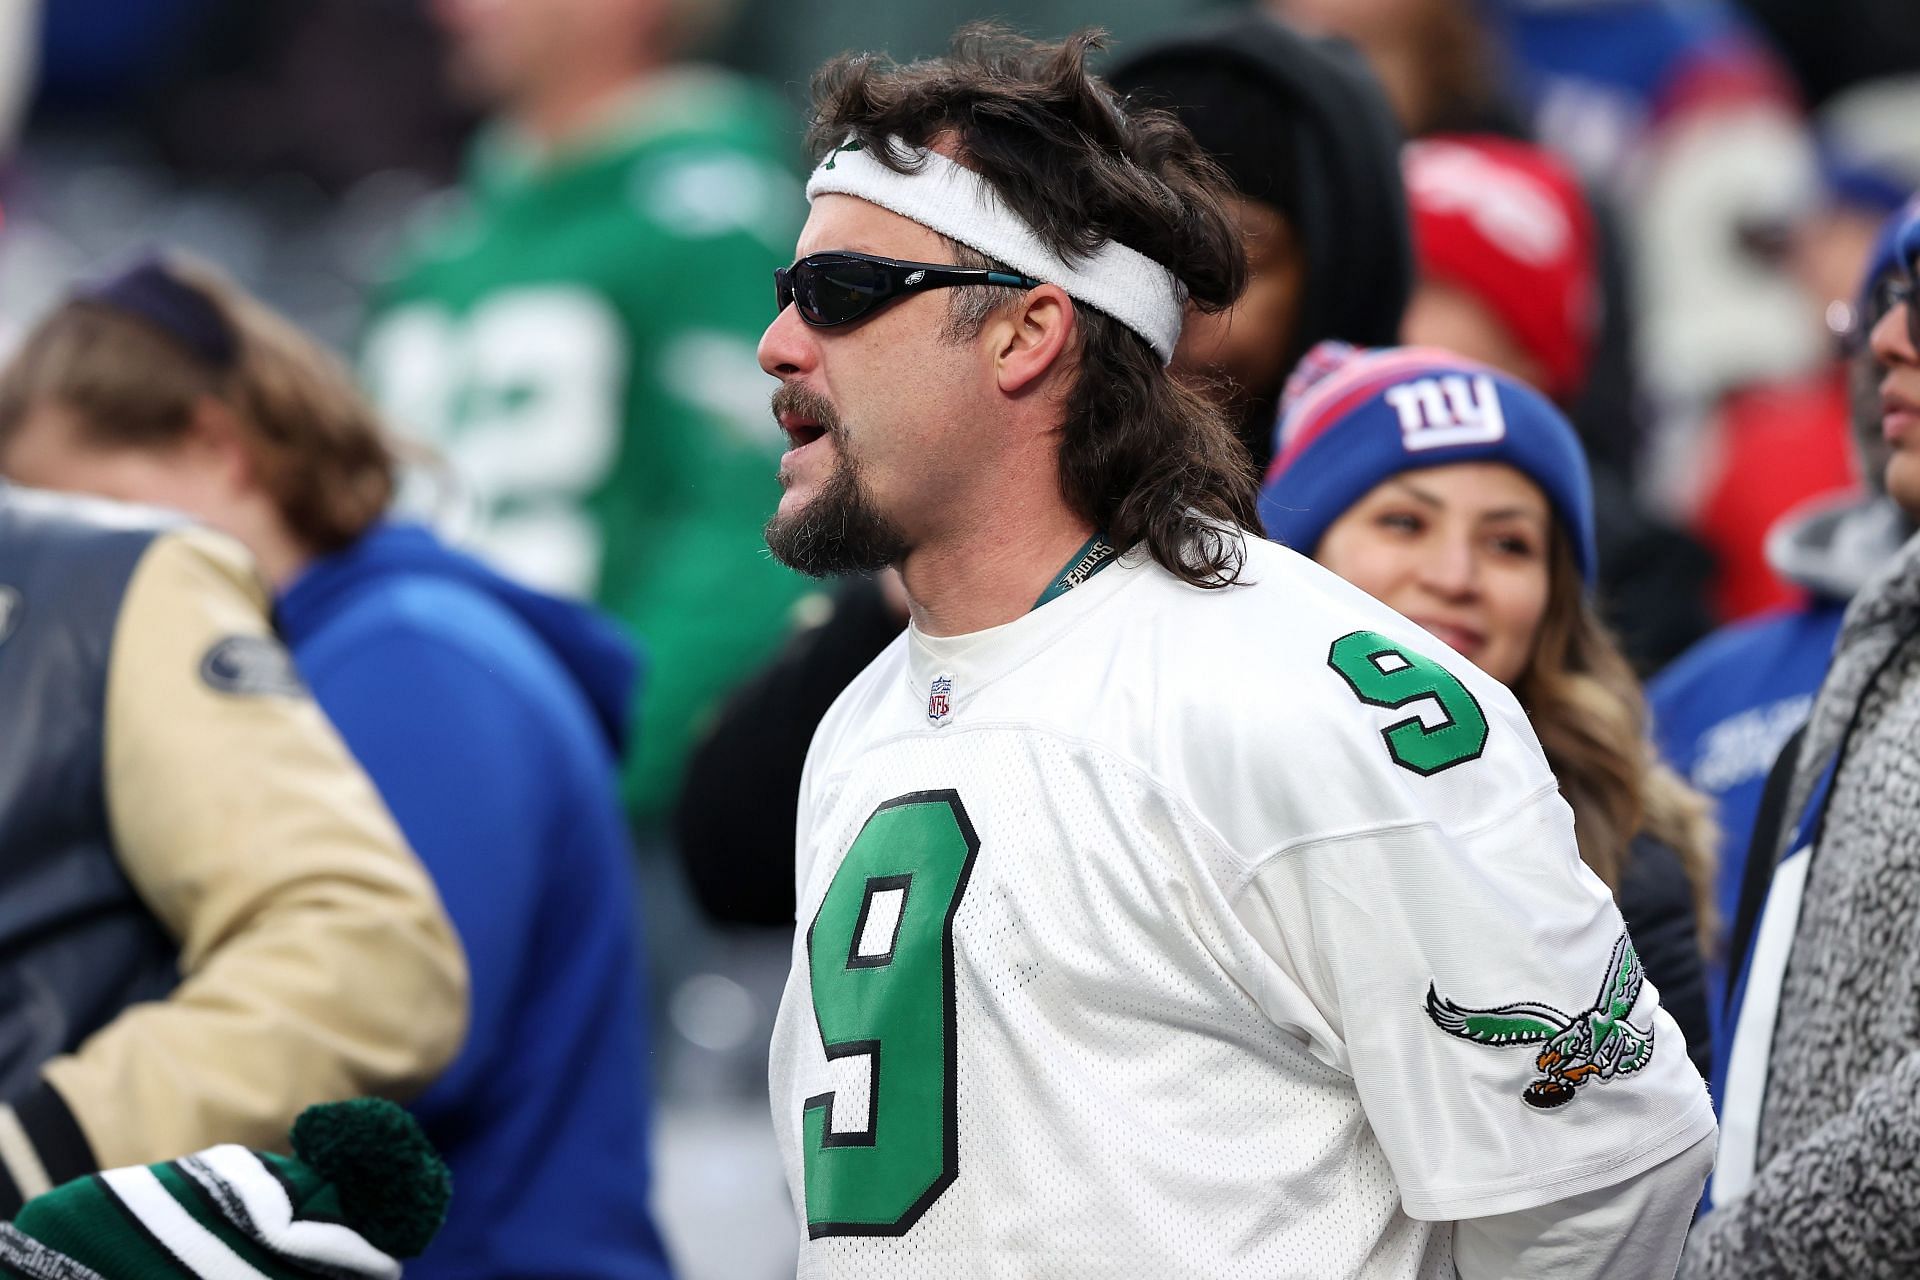 Photos from Philadelphia Eagles 13-7 loss to New York Giants — NFL, Week 12